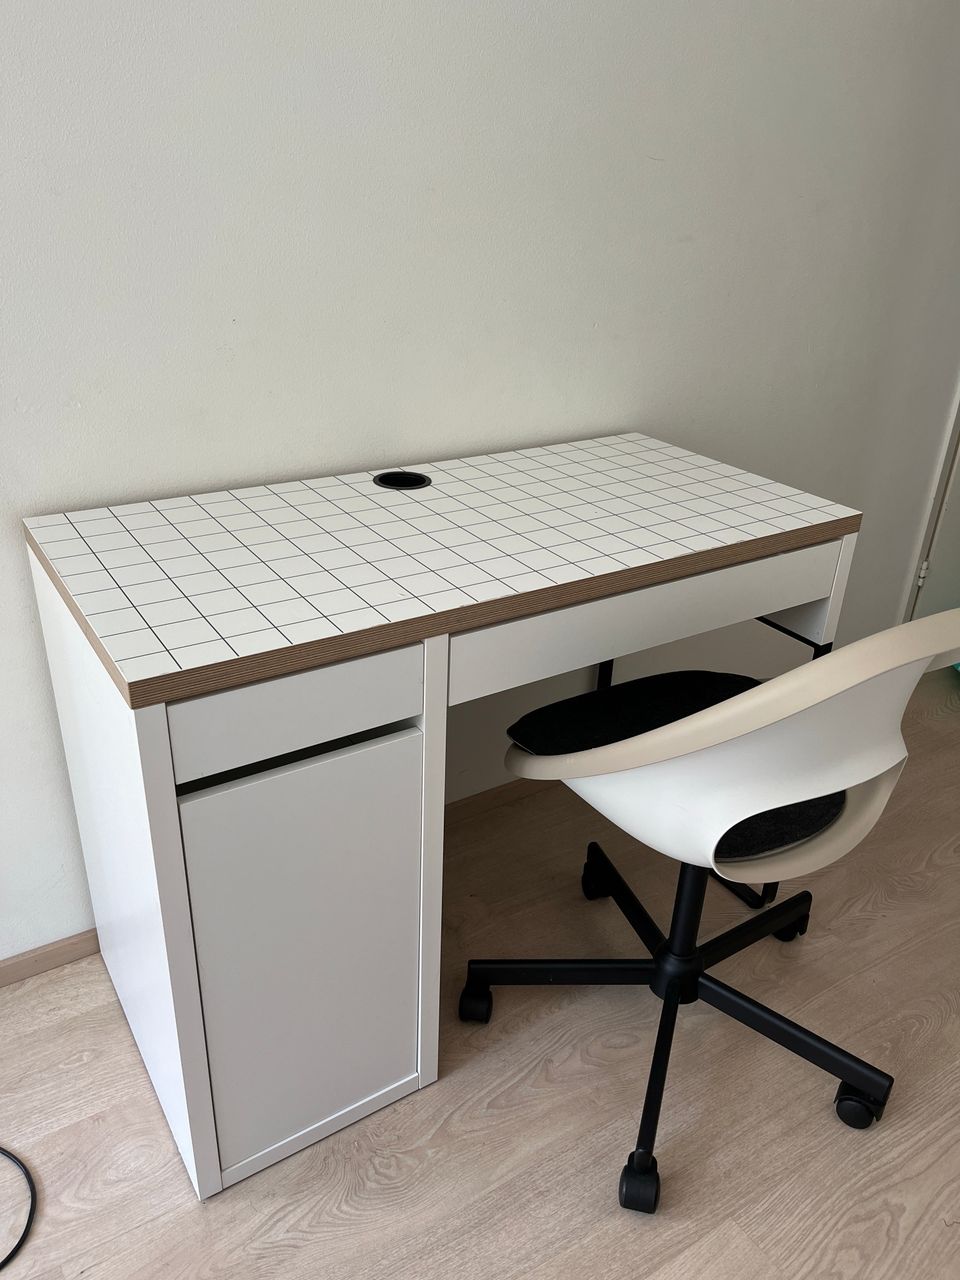 IKEA Desk and Chair in good condition